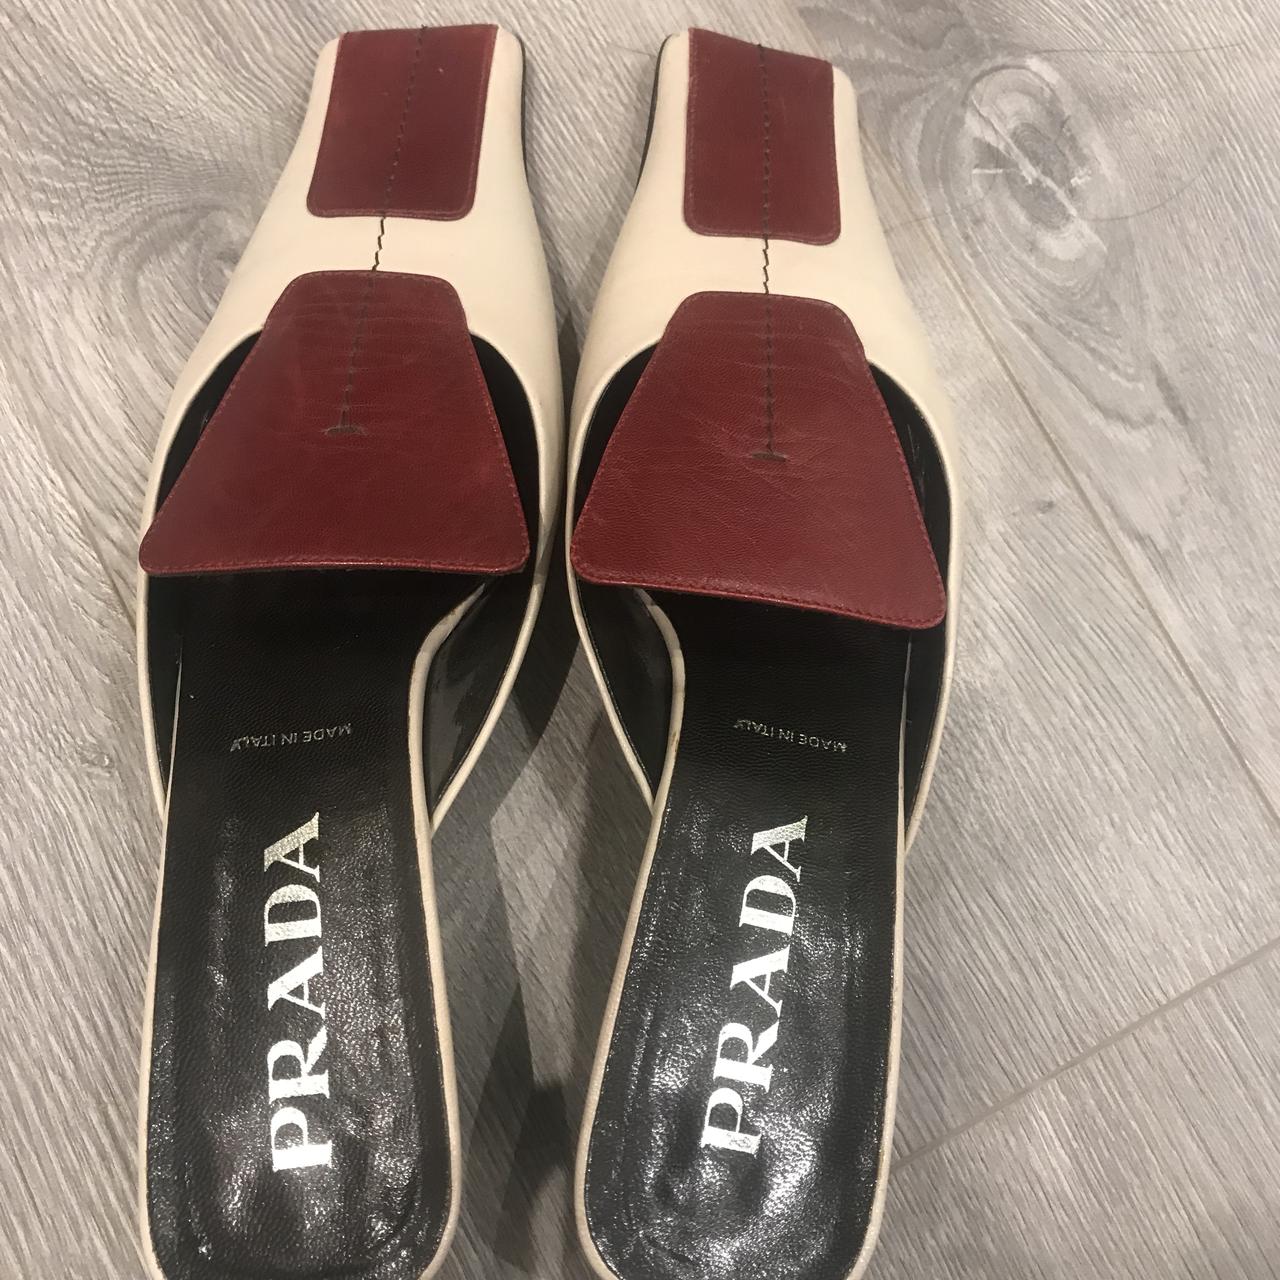 Prada mules in great condition just one scuff on the - Depop